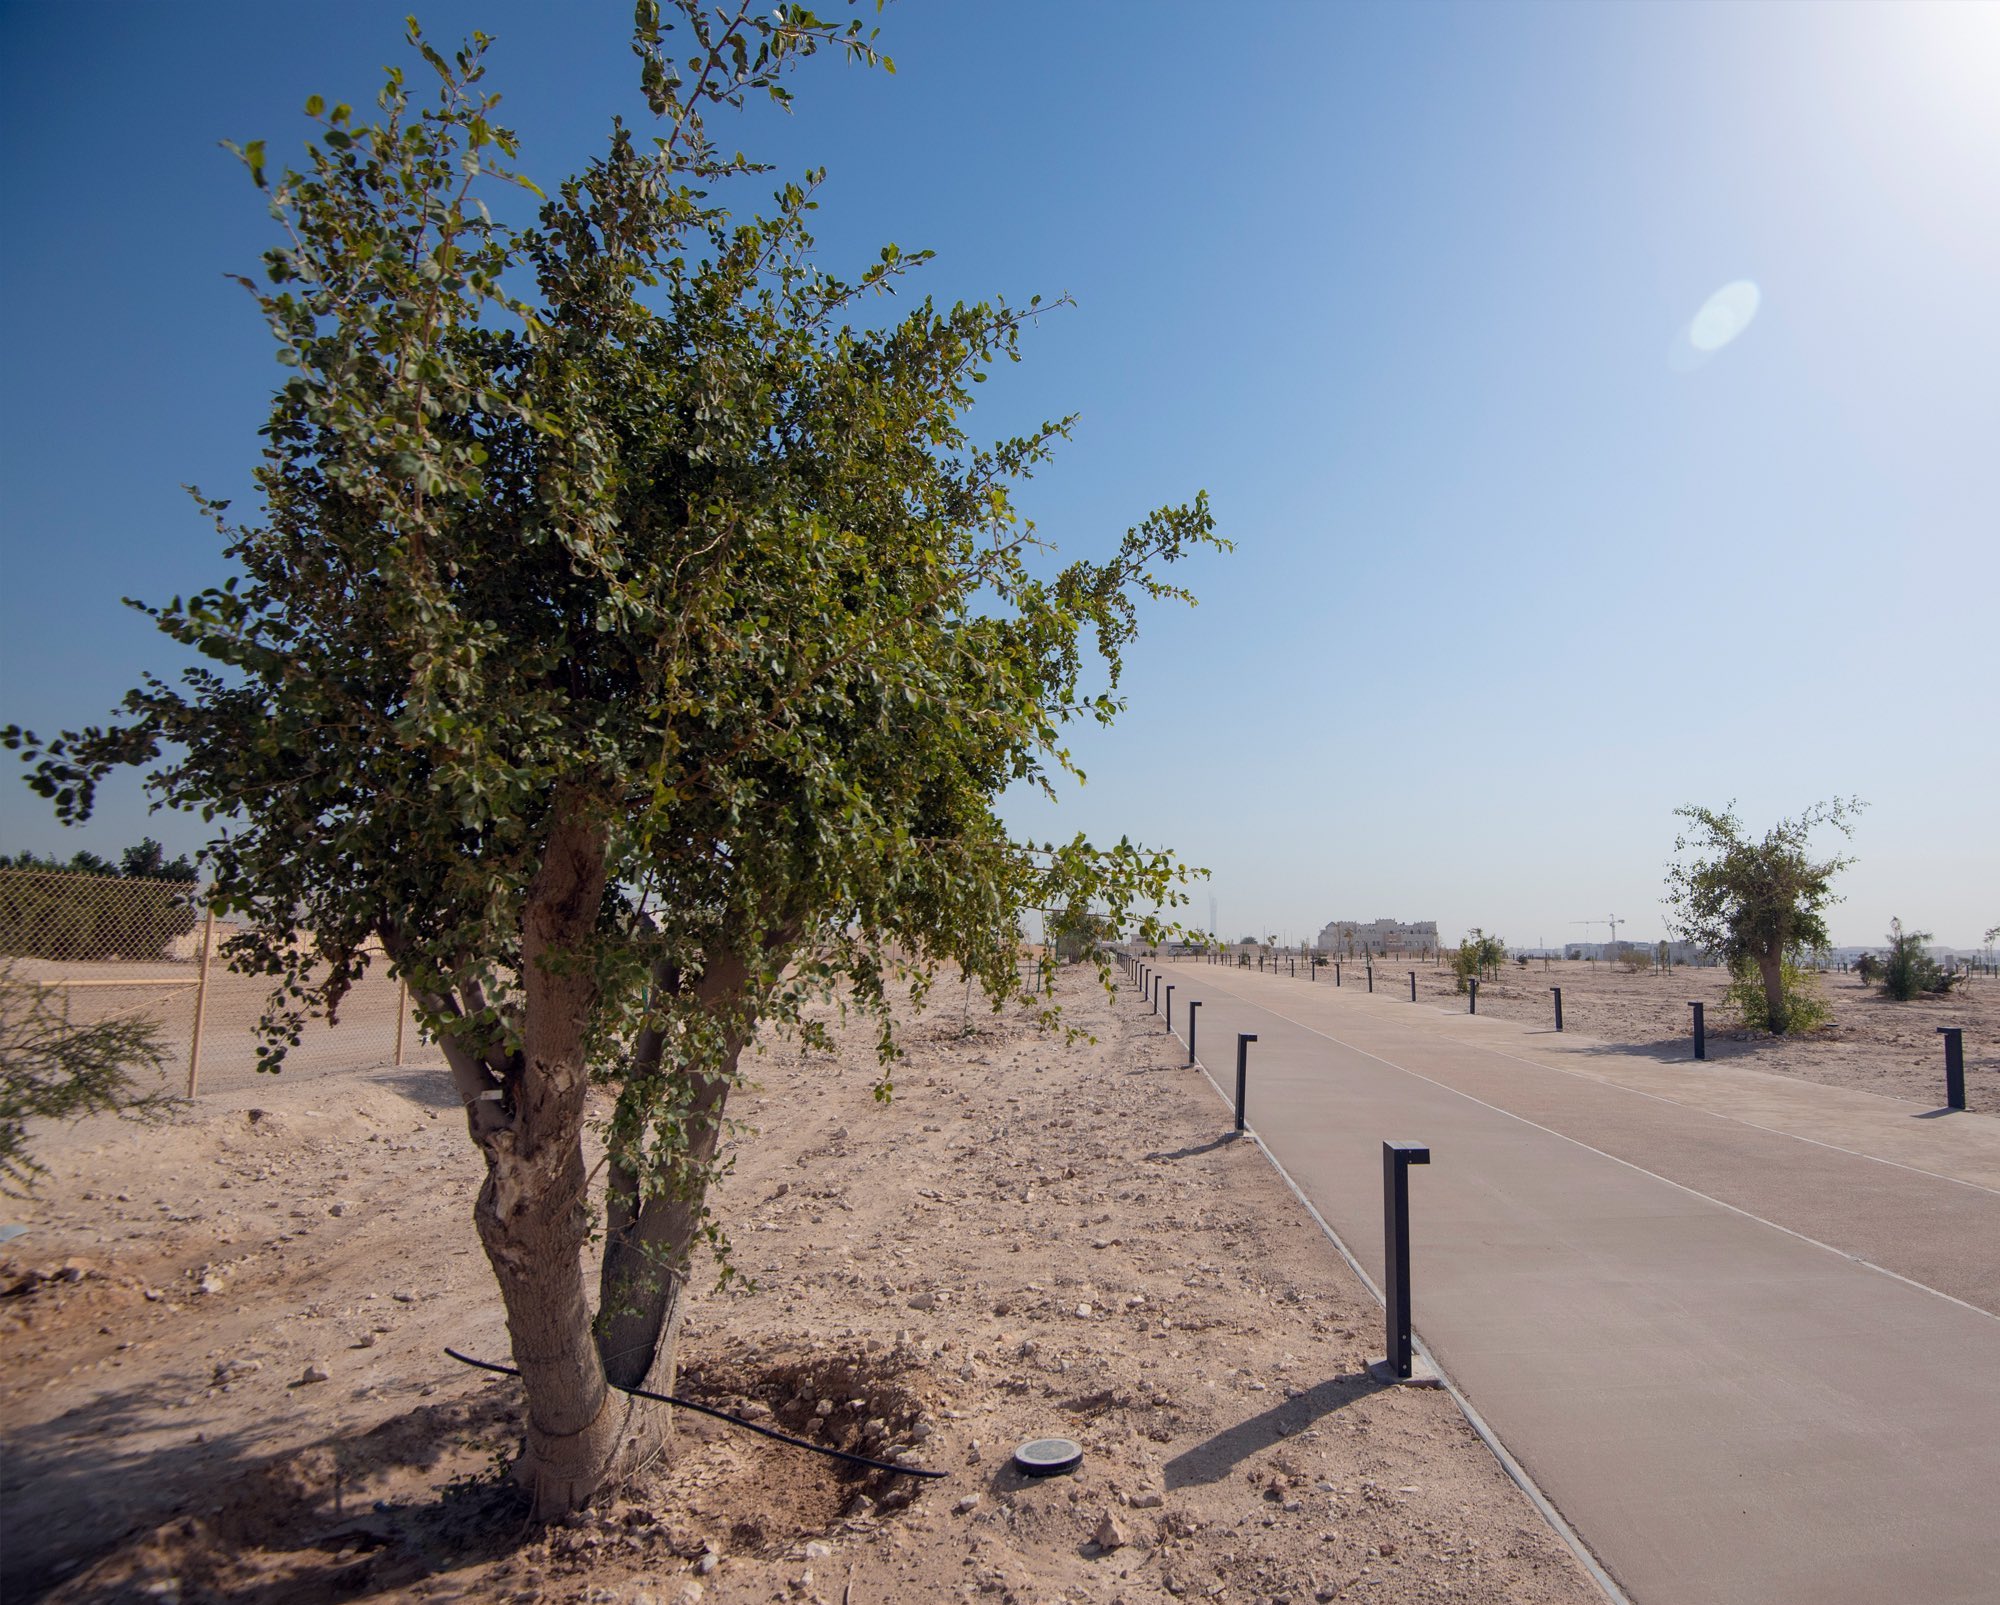 Ashghal Announces Completion of Development Works of Al Wadi Park Natural Reserve